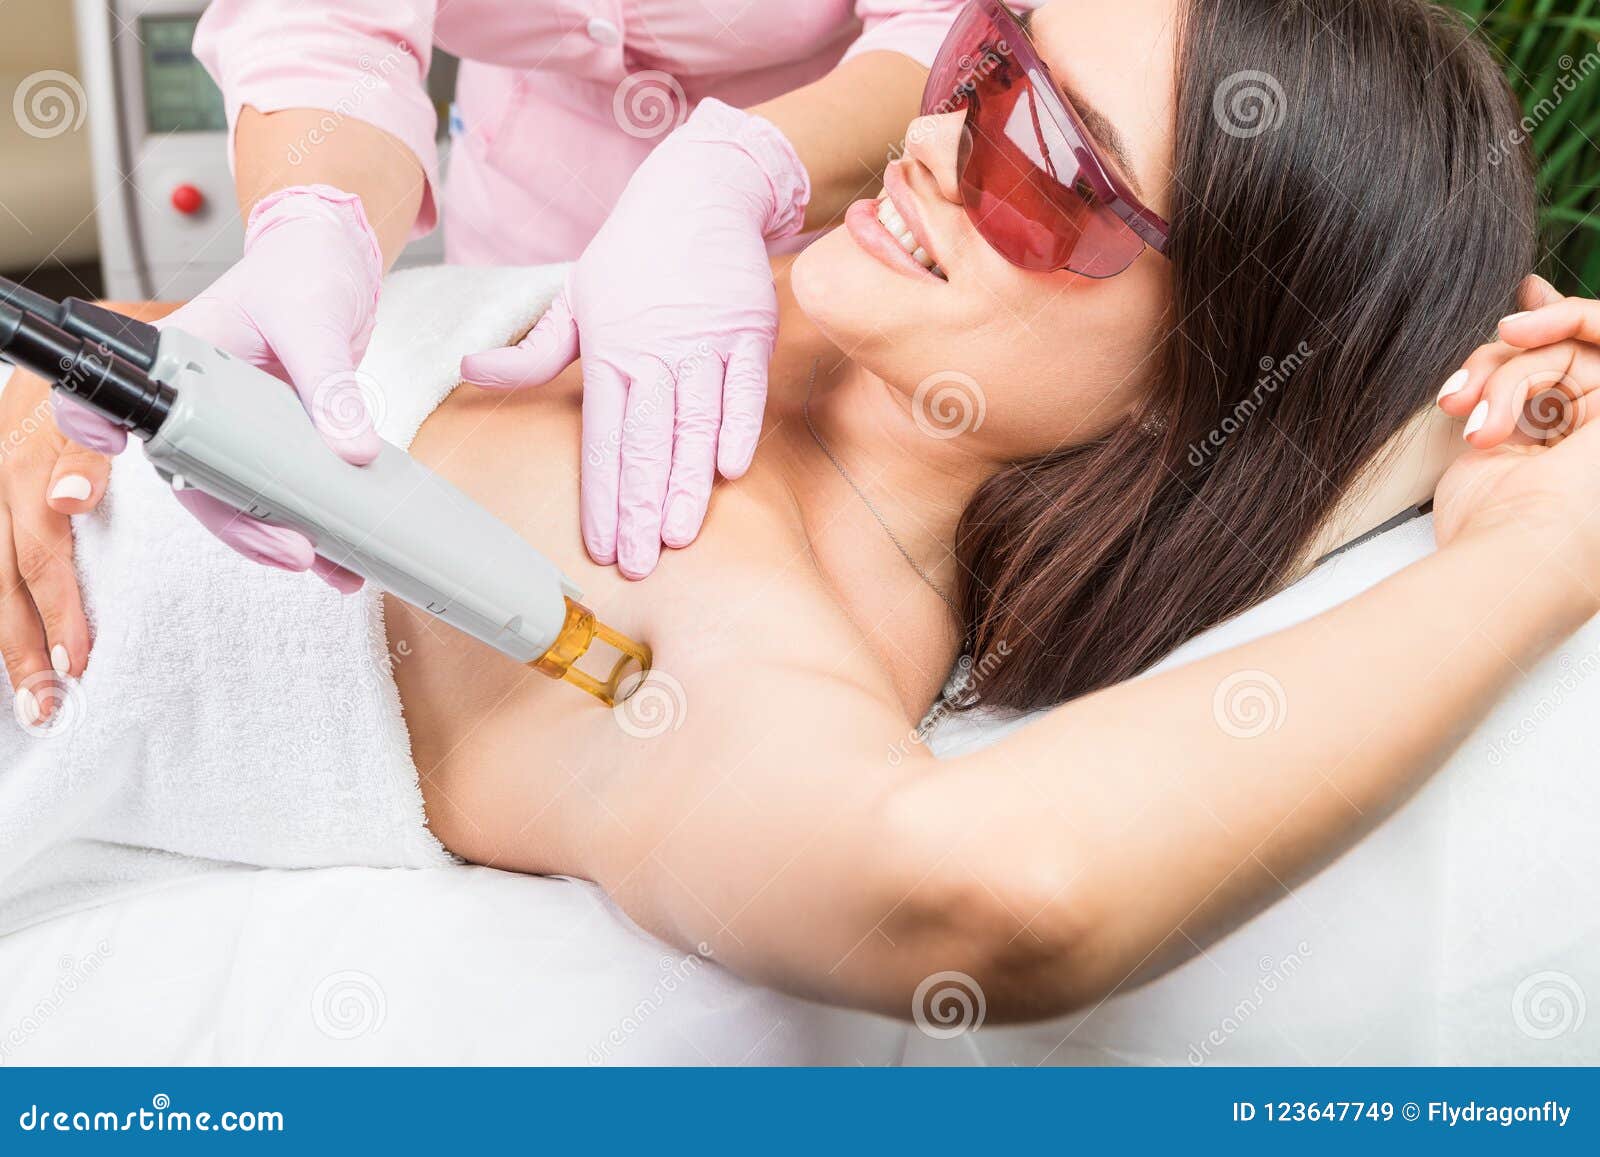 armpit laser hair removal. beautiful smiling woman client in red glasses having procedure.